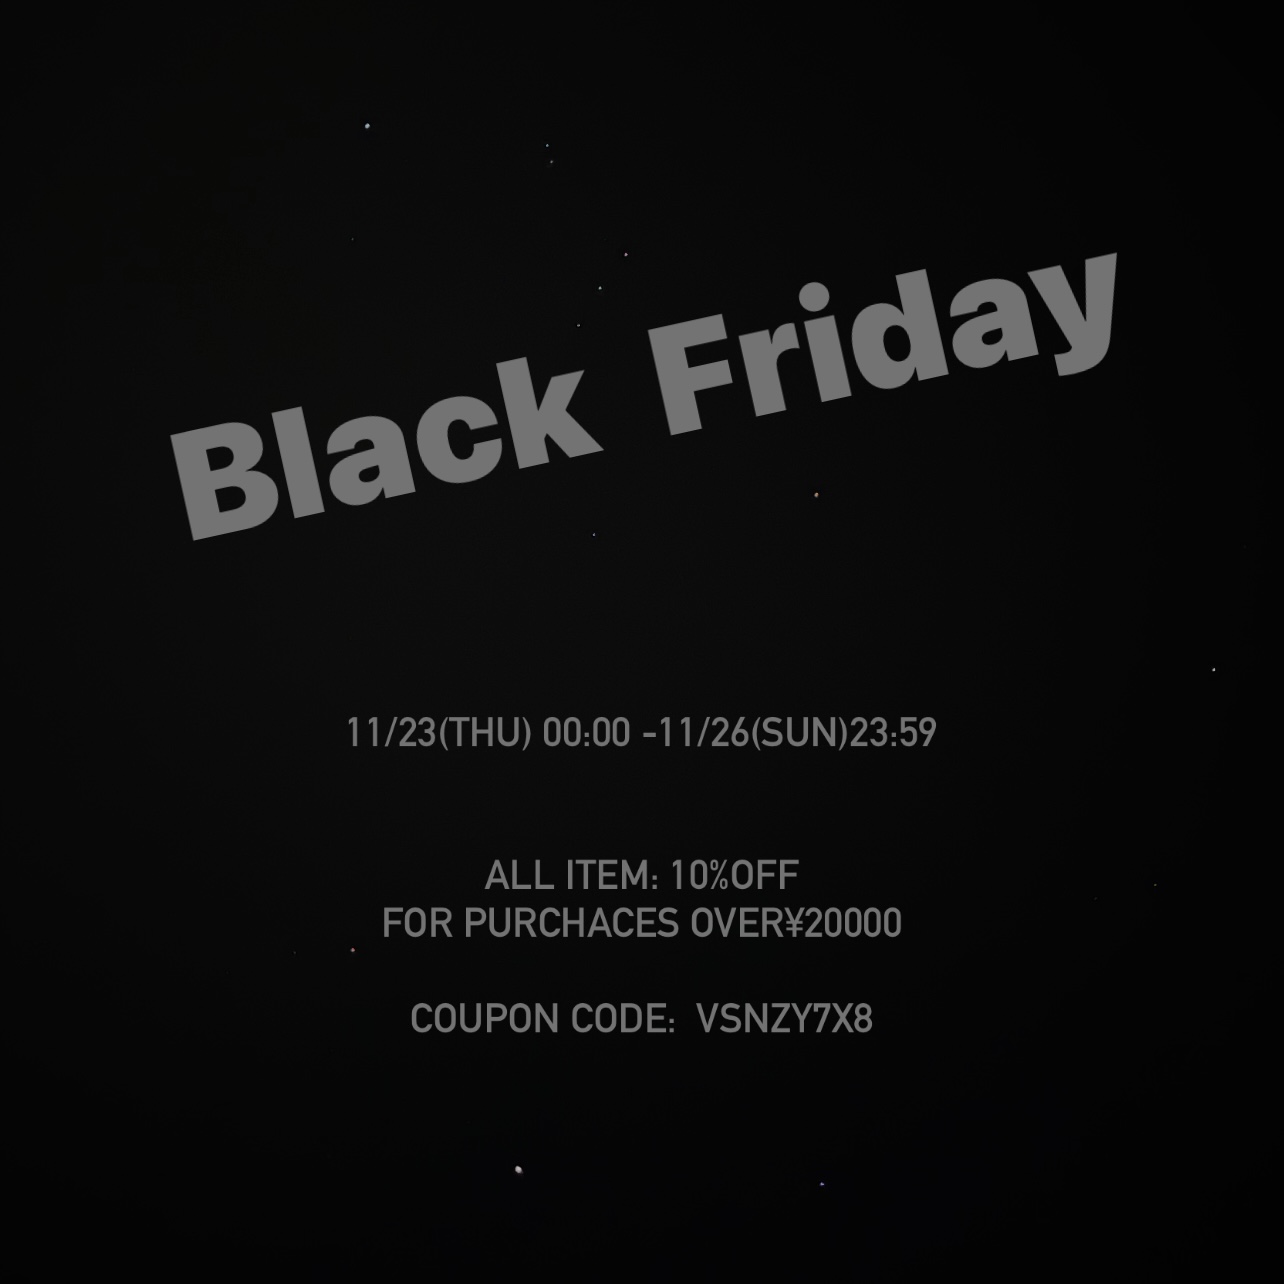 Black Friday coupon campaign : all item 10%off